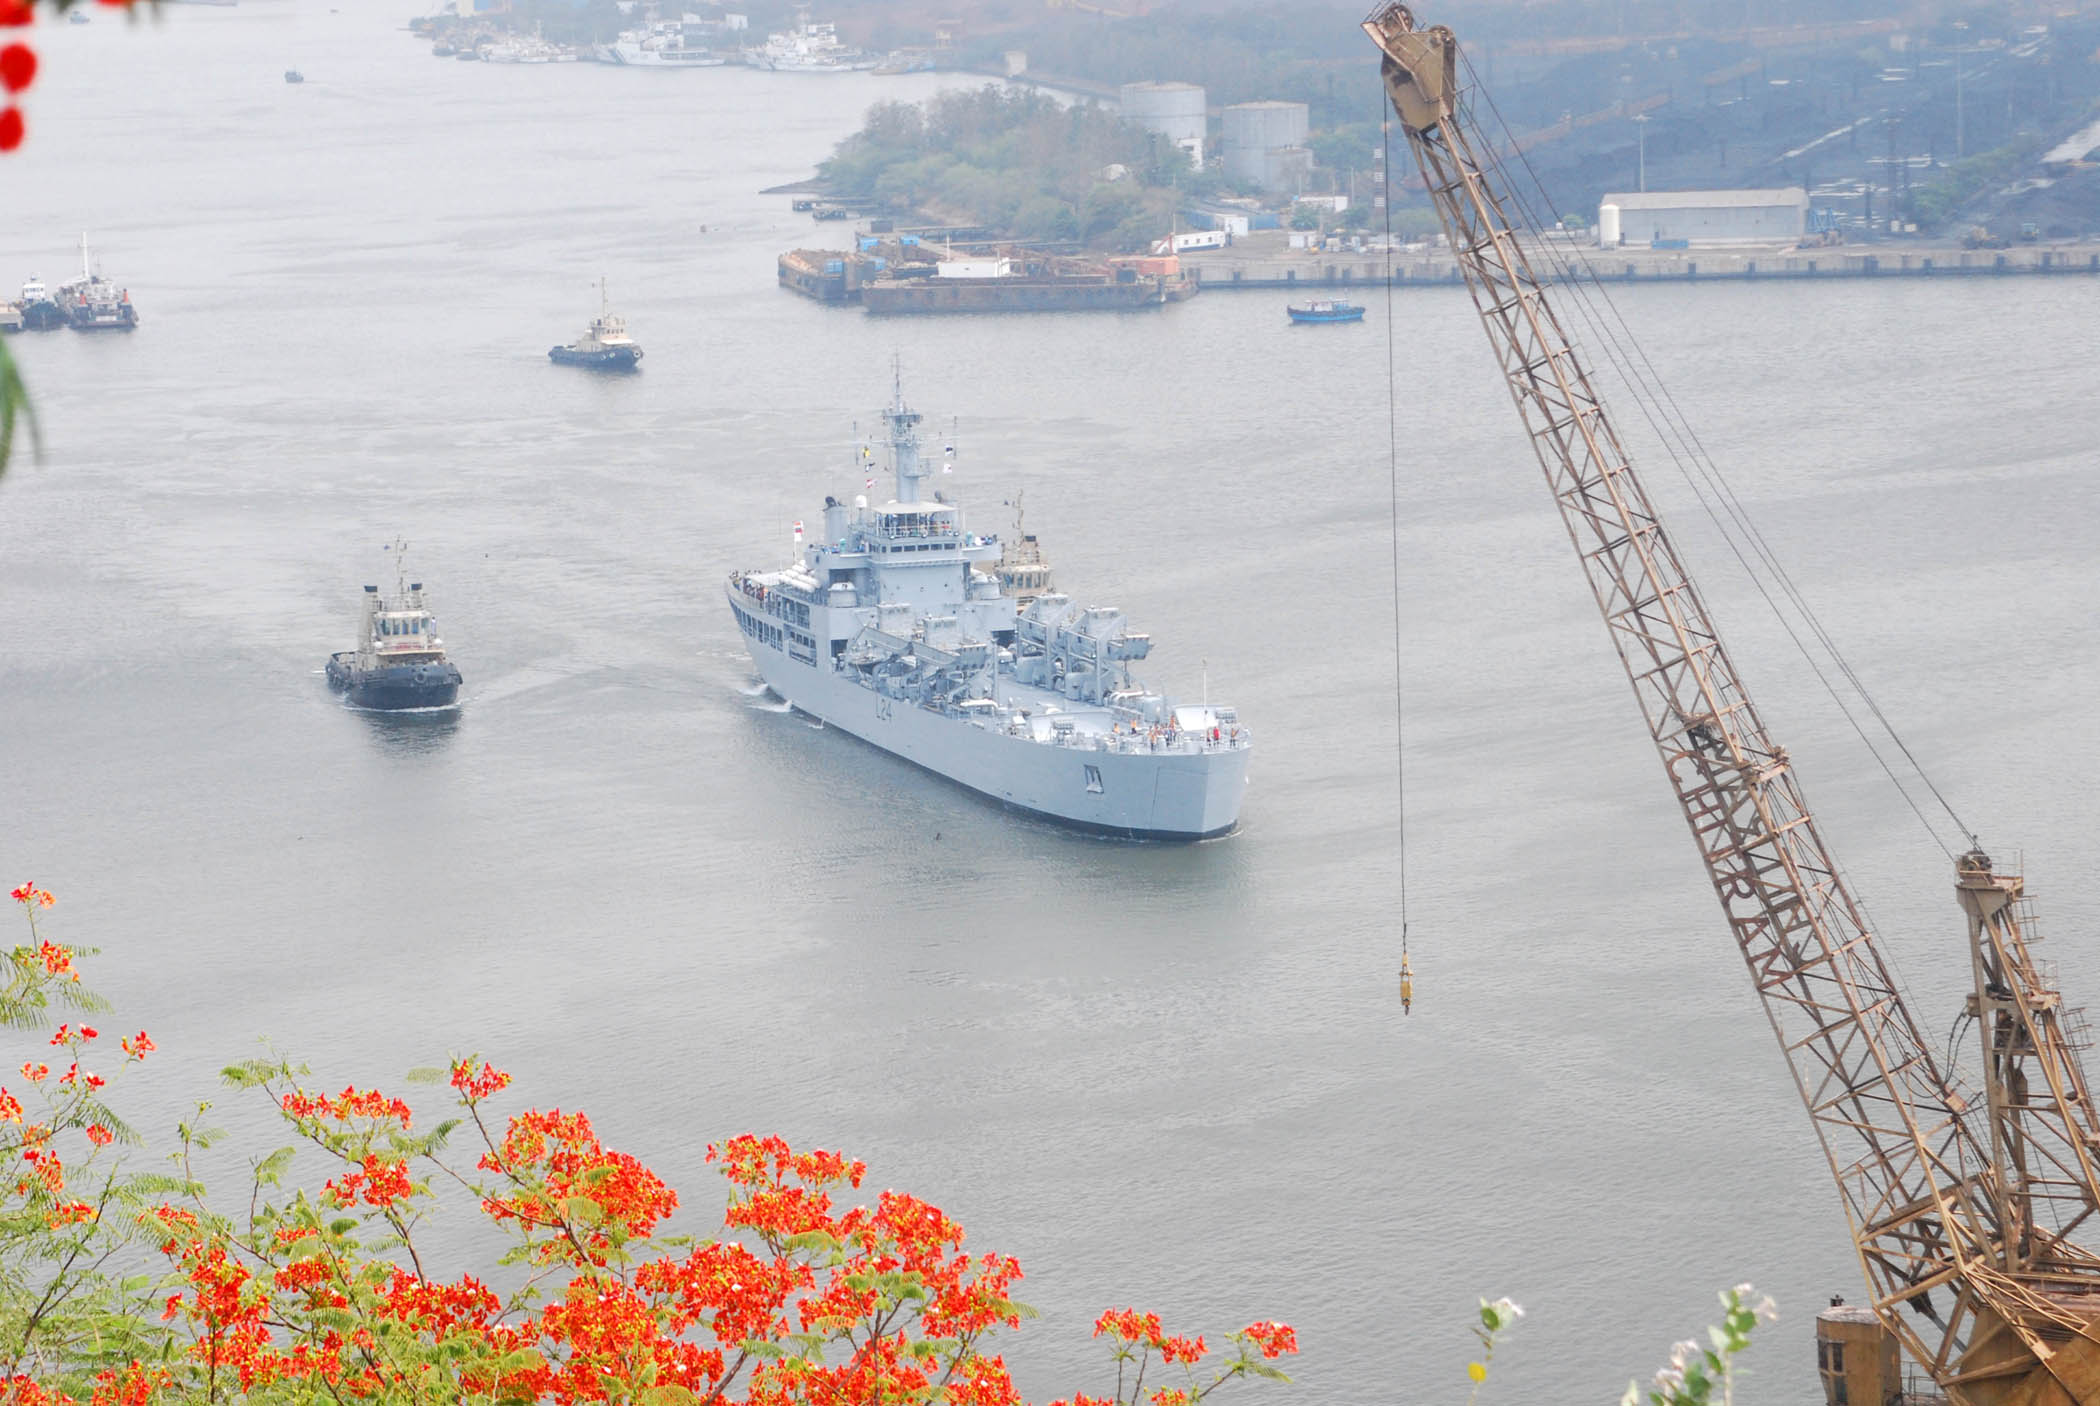 The_INS_Airavat_sails_out_of_Visakhapatnam_harbour_after_commissioning_on_May_19%2C_2009.jpg